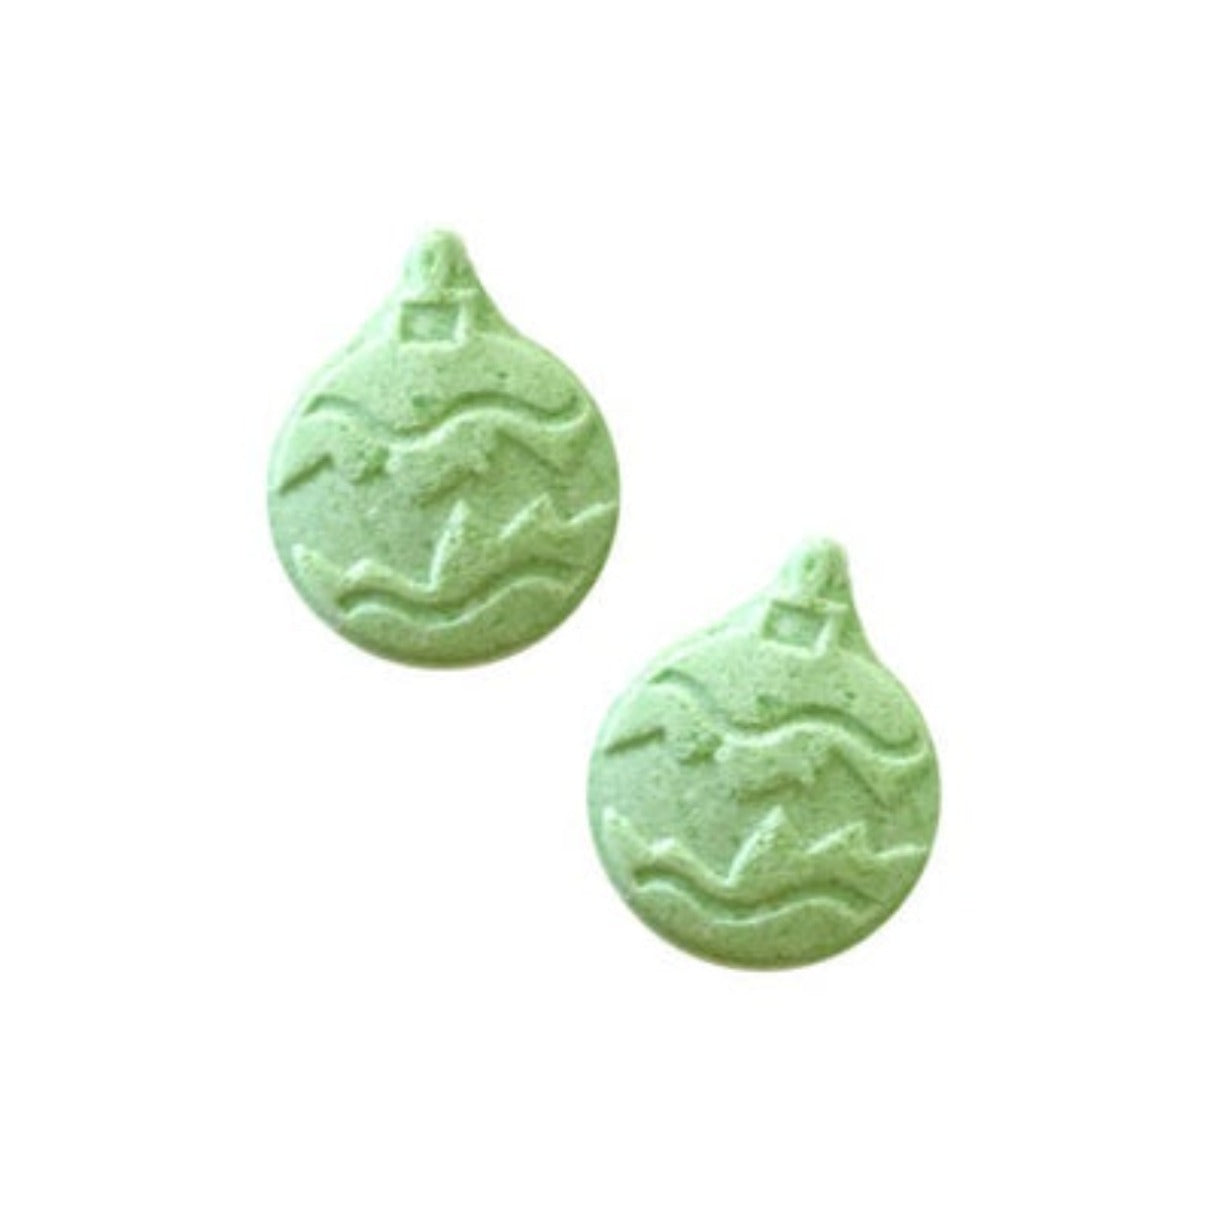 Boston America The Office Holiday Candy Ornaments 0.8oz - 12ct